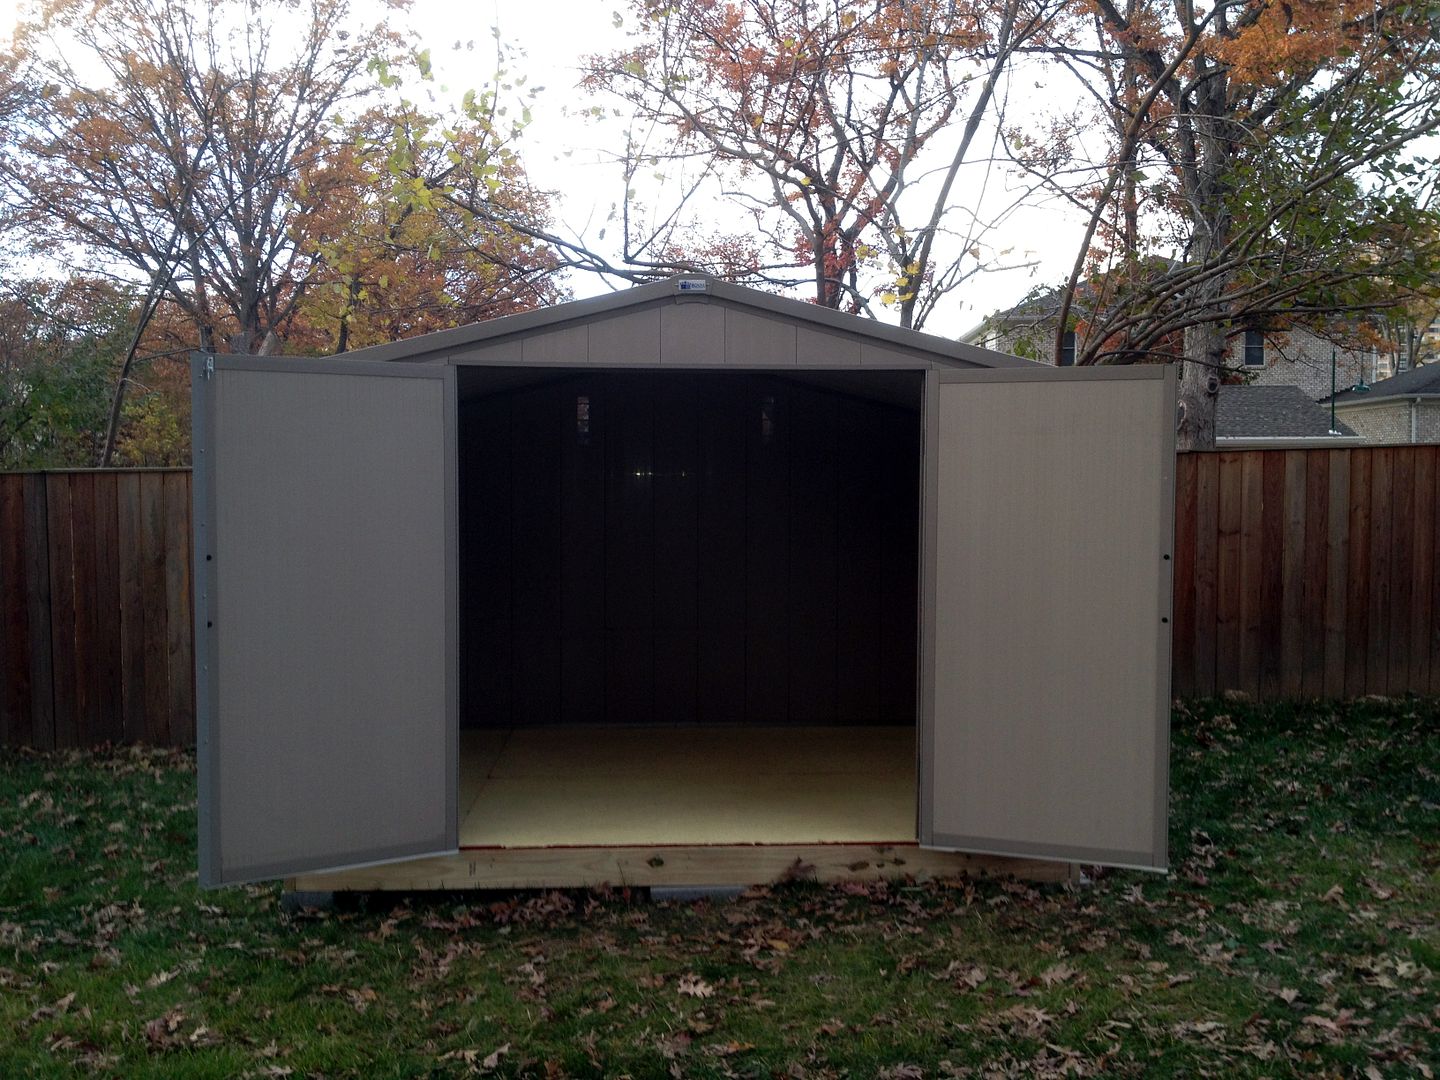 Re: Anyone buy from Sheds unlimited? How hard is it to move a shed?